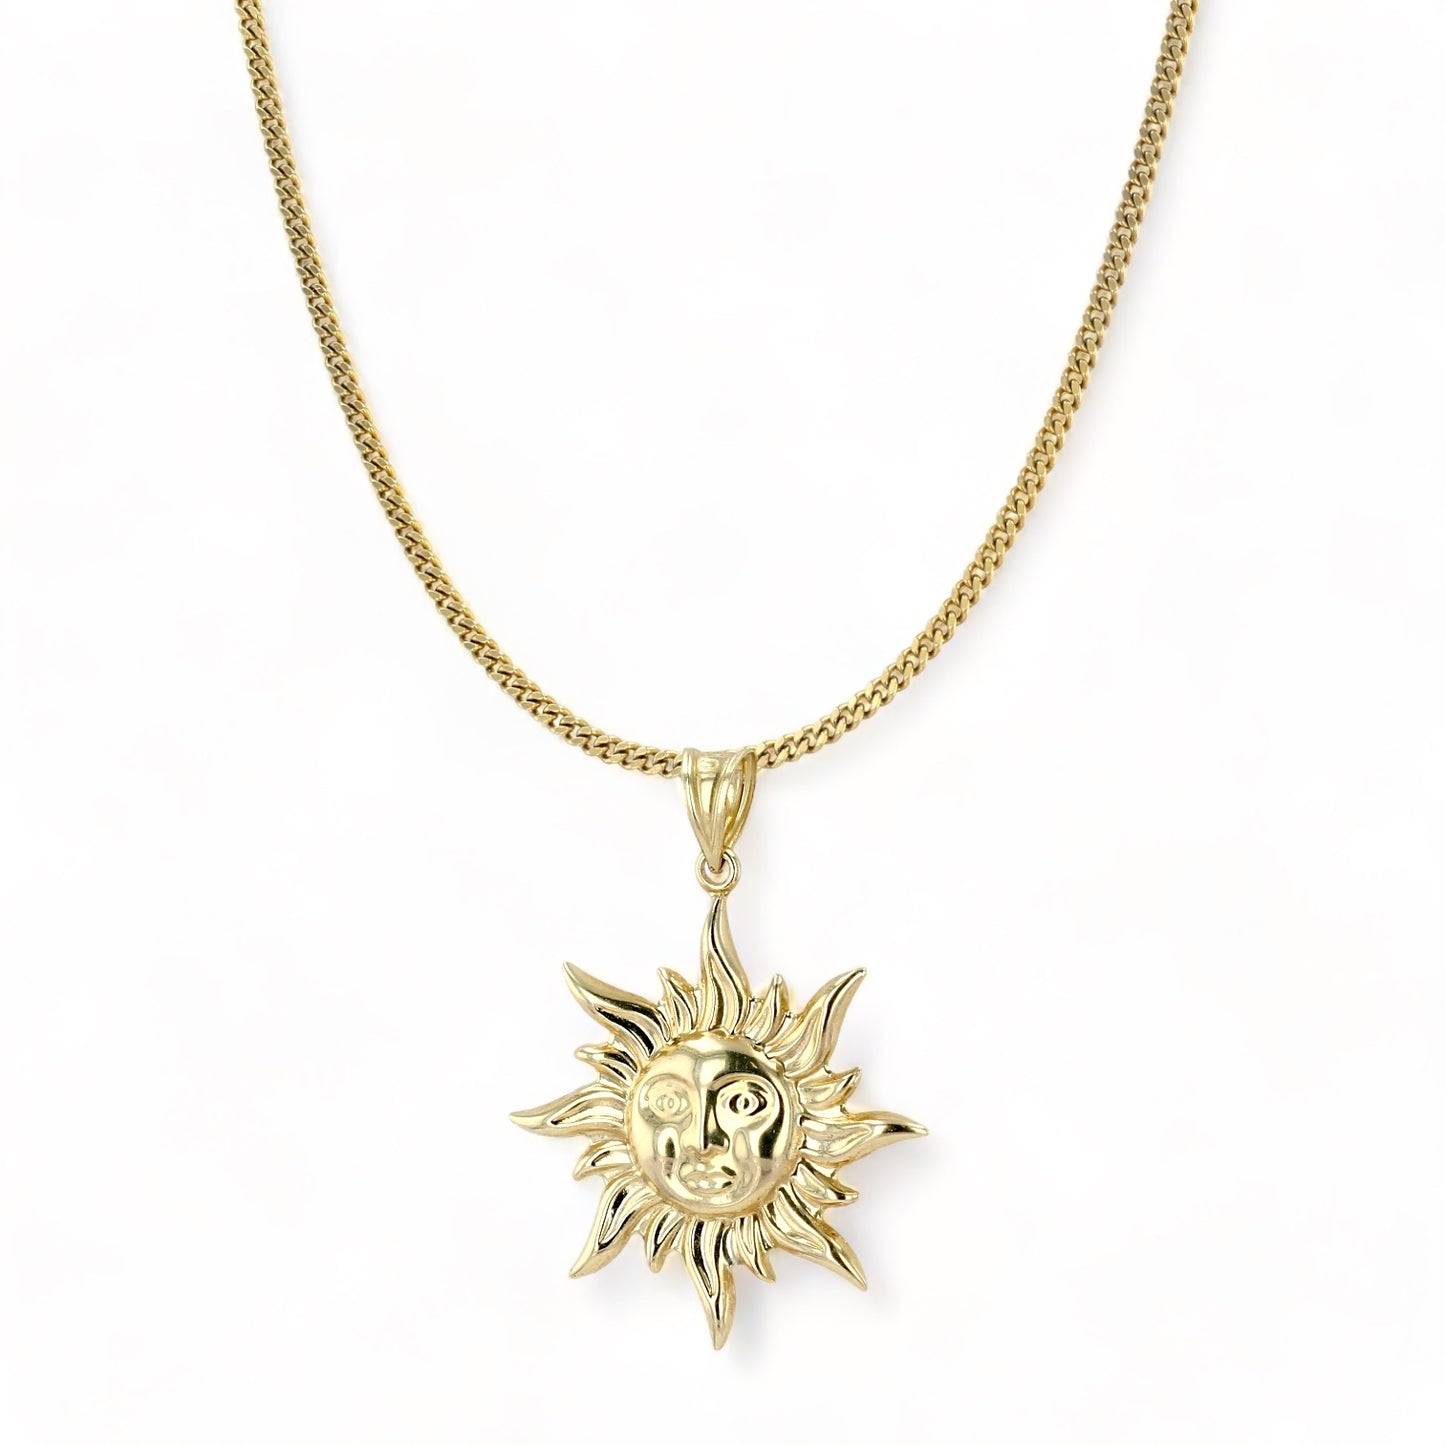 10K yellow gold sun necklace-65389